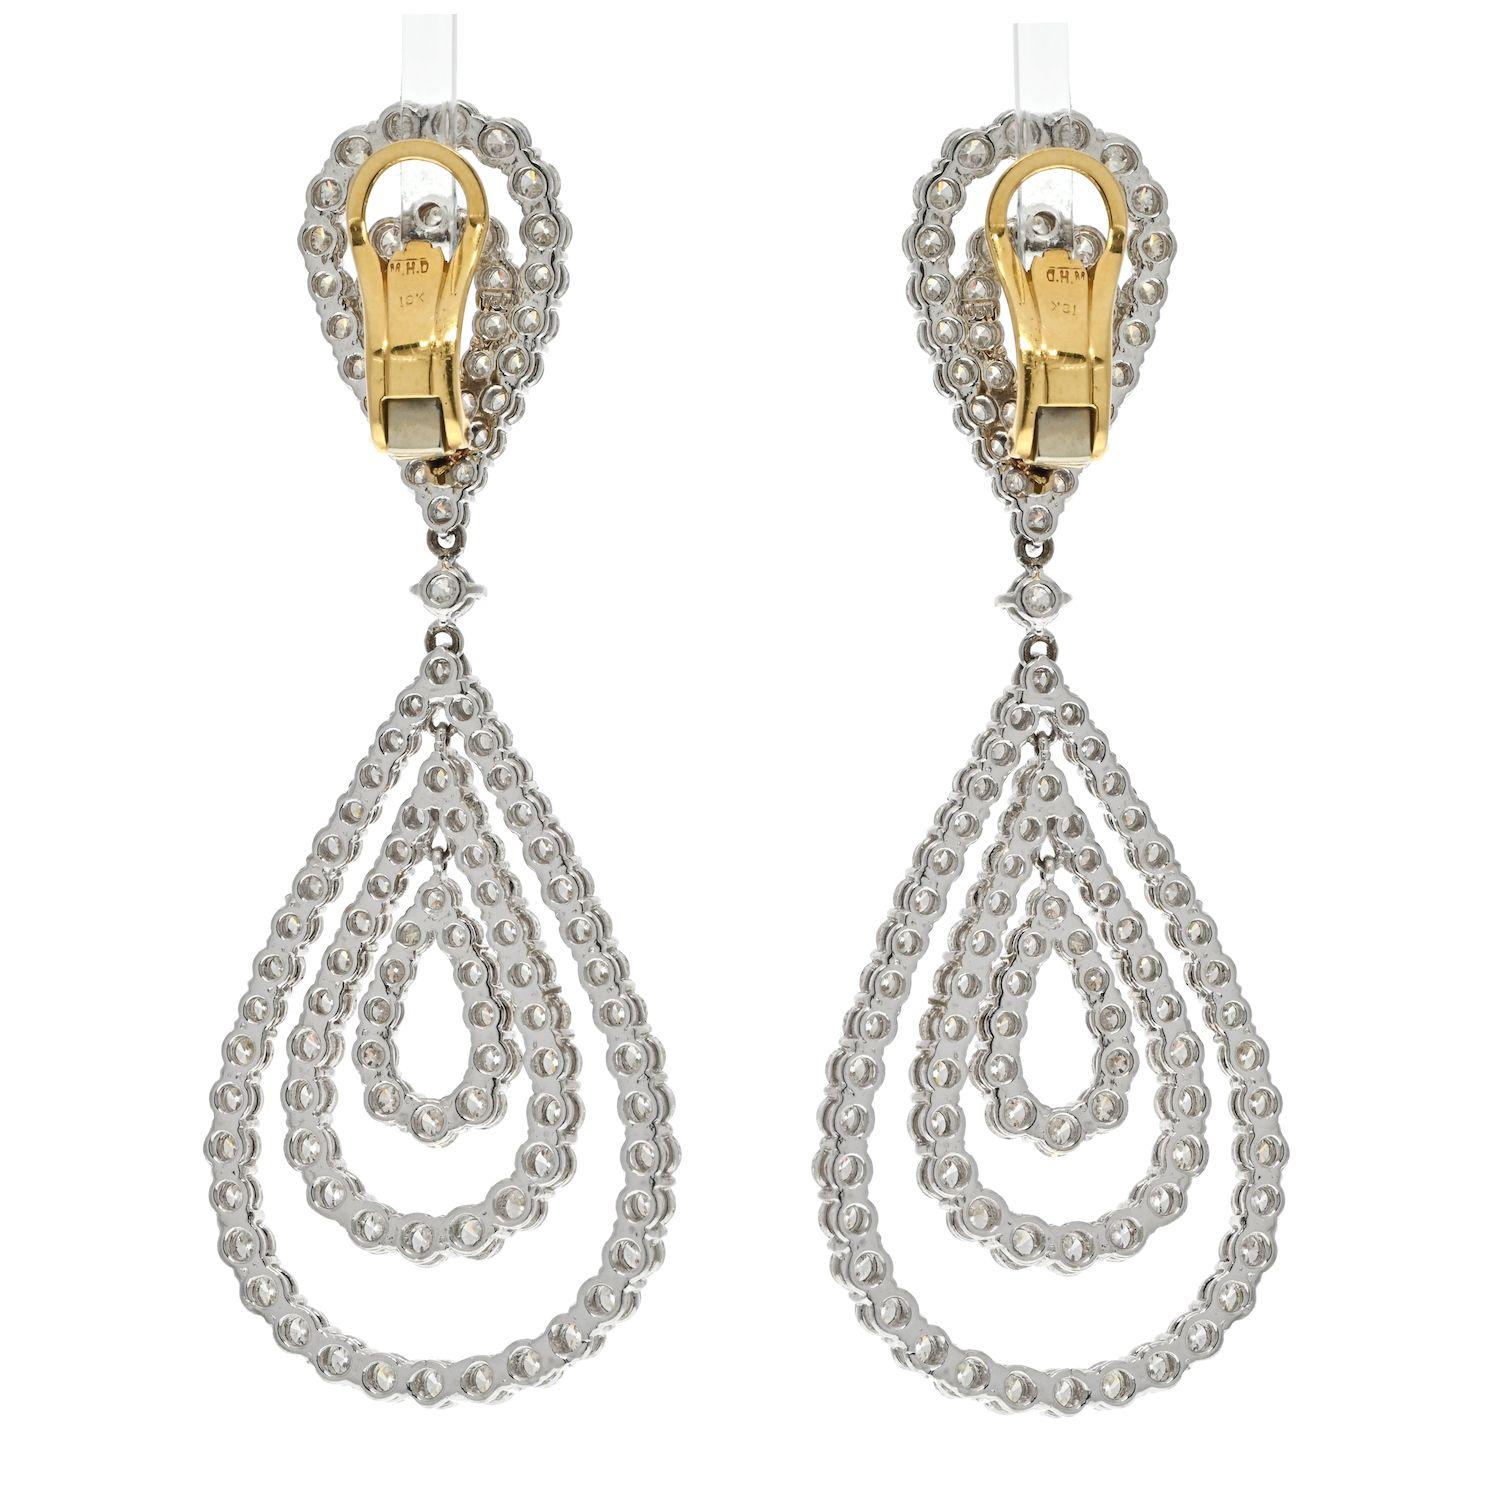 18K White Gold 21 Carat Diamond Chandelier Dangling Earrings In Excellent Condition For Sale In New York, NY